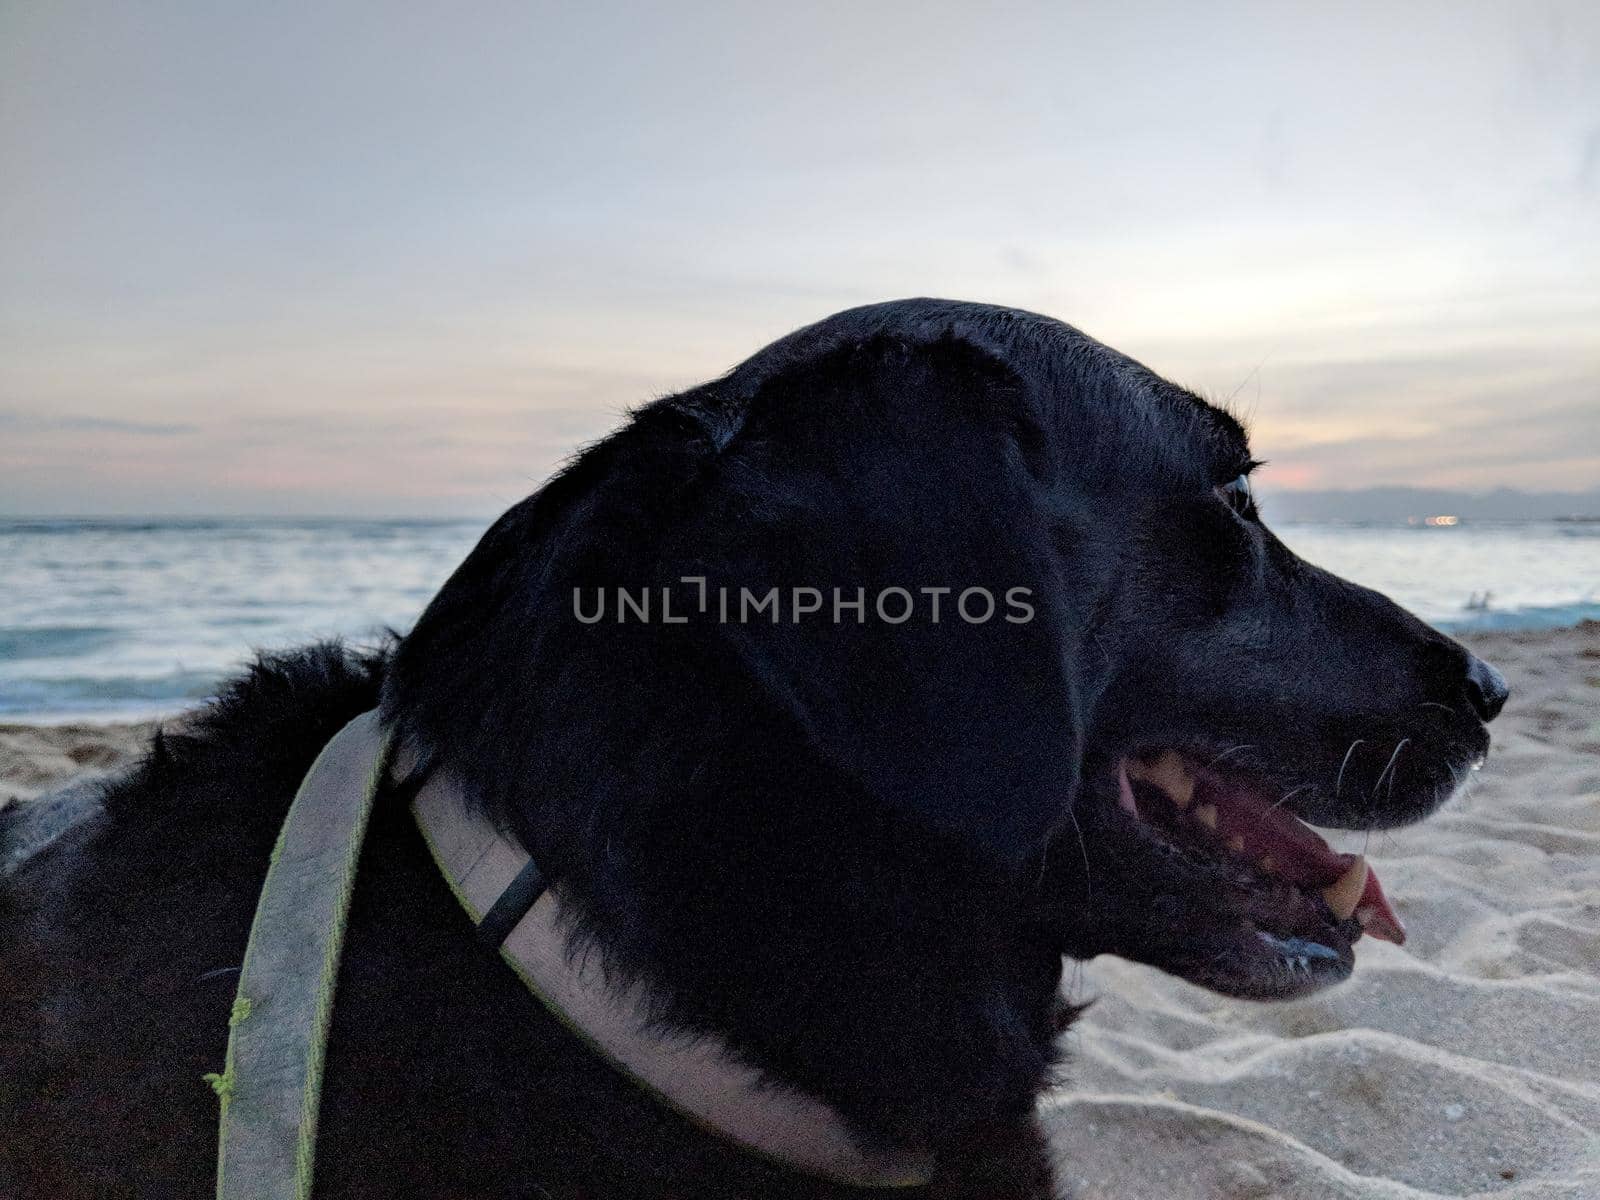 Black retriever Dog wearing a leash and tongue hanging out at dusk with view of Pacific ocean off coast of Oahu, Hawaii.